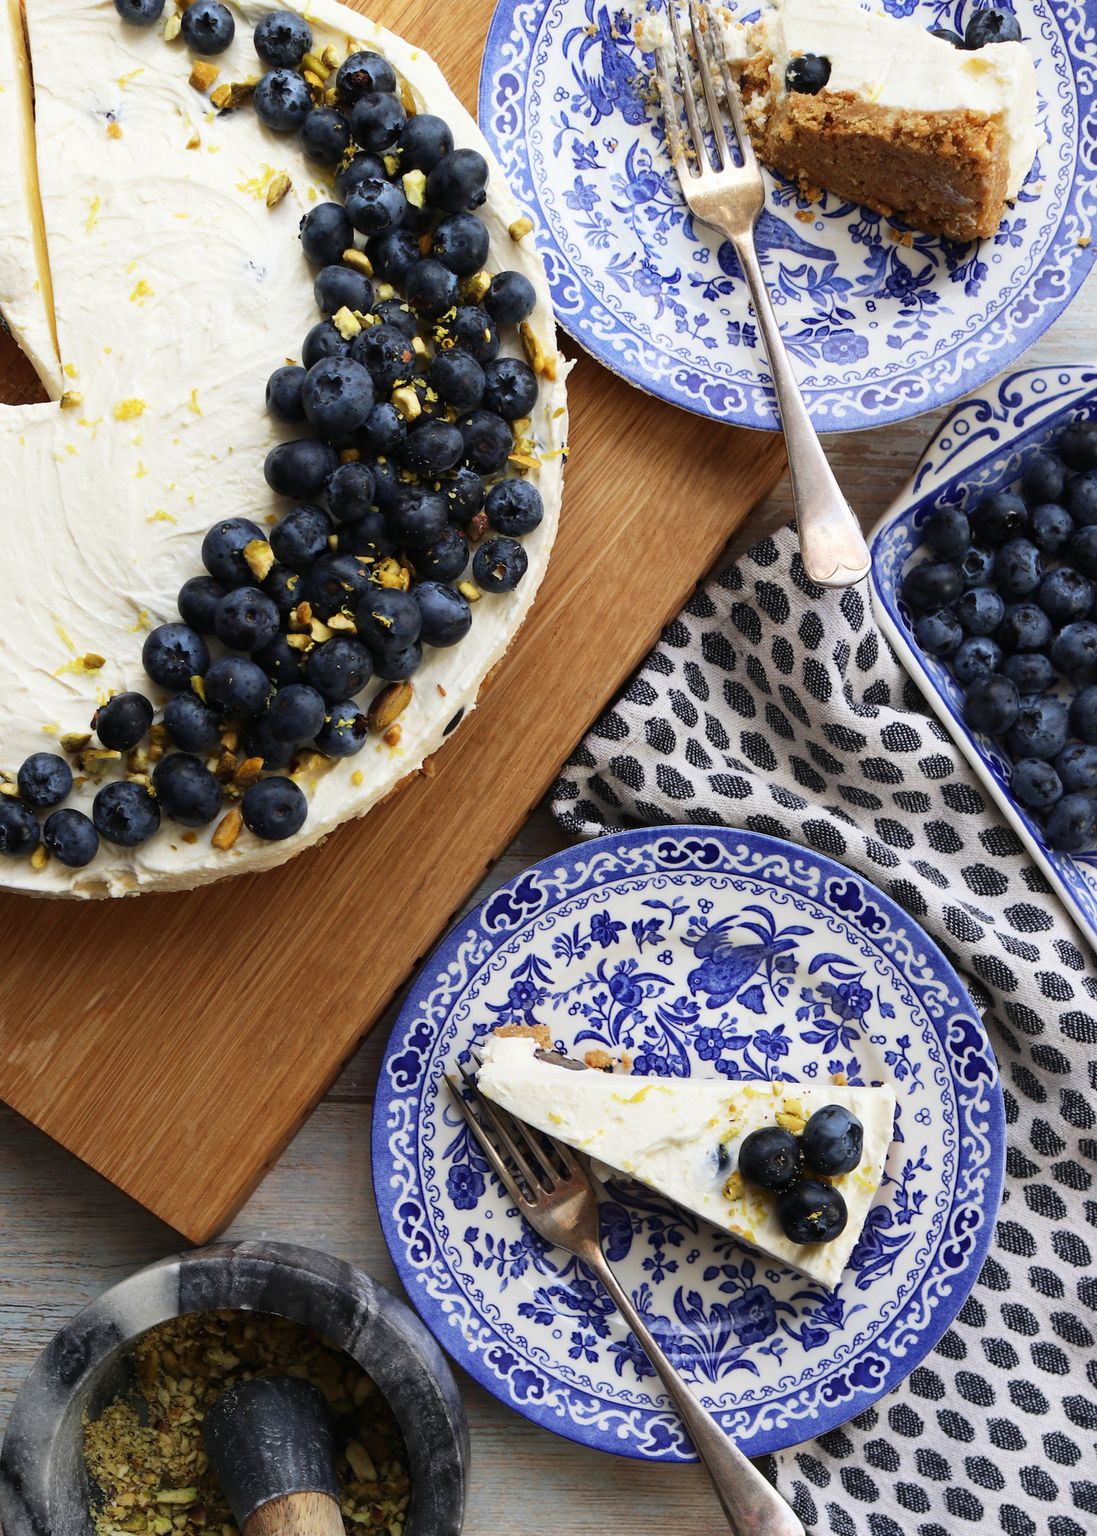 Lemon and Blueberry Cheesecake | The No-Bake Showstopper